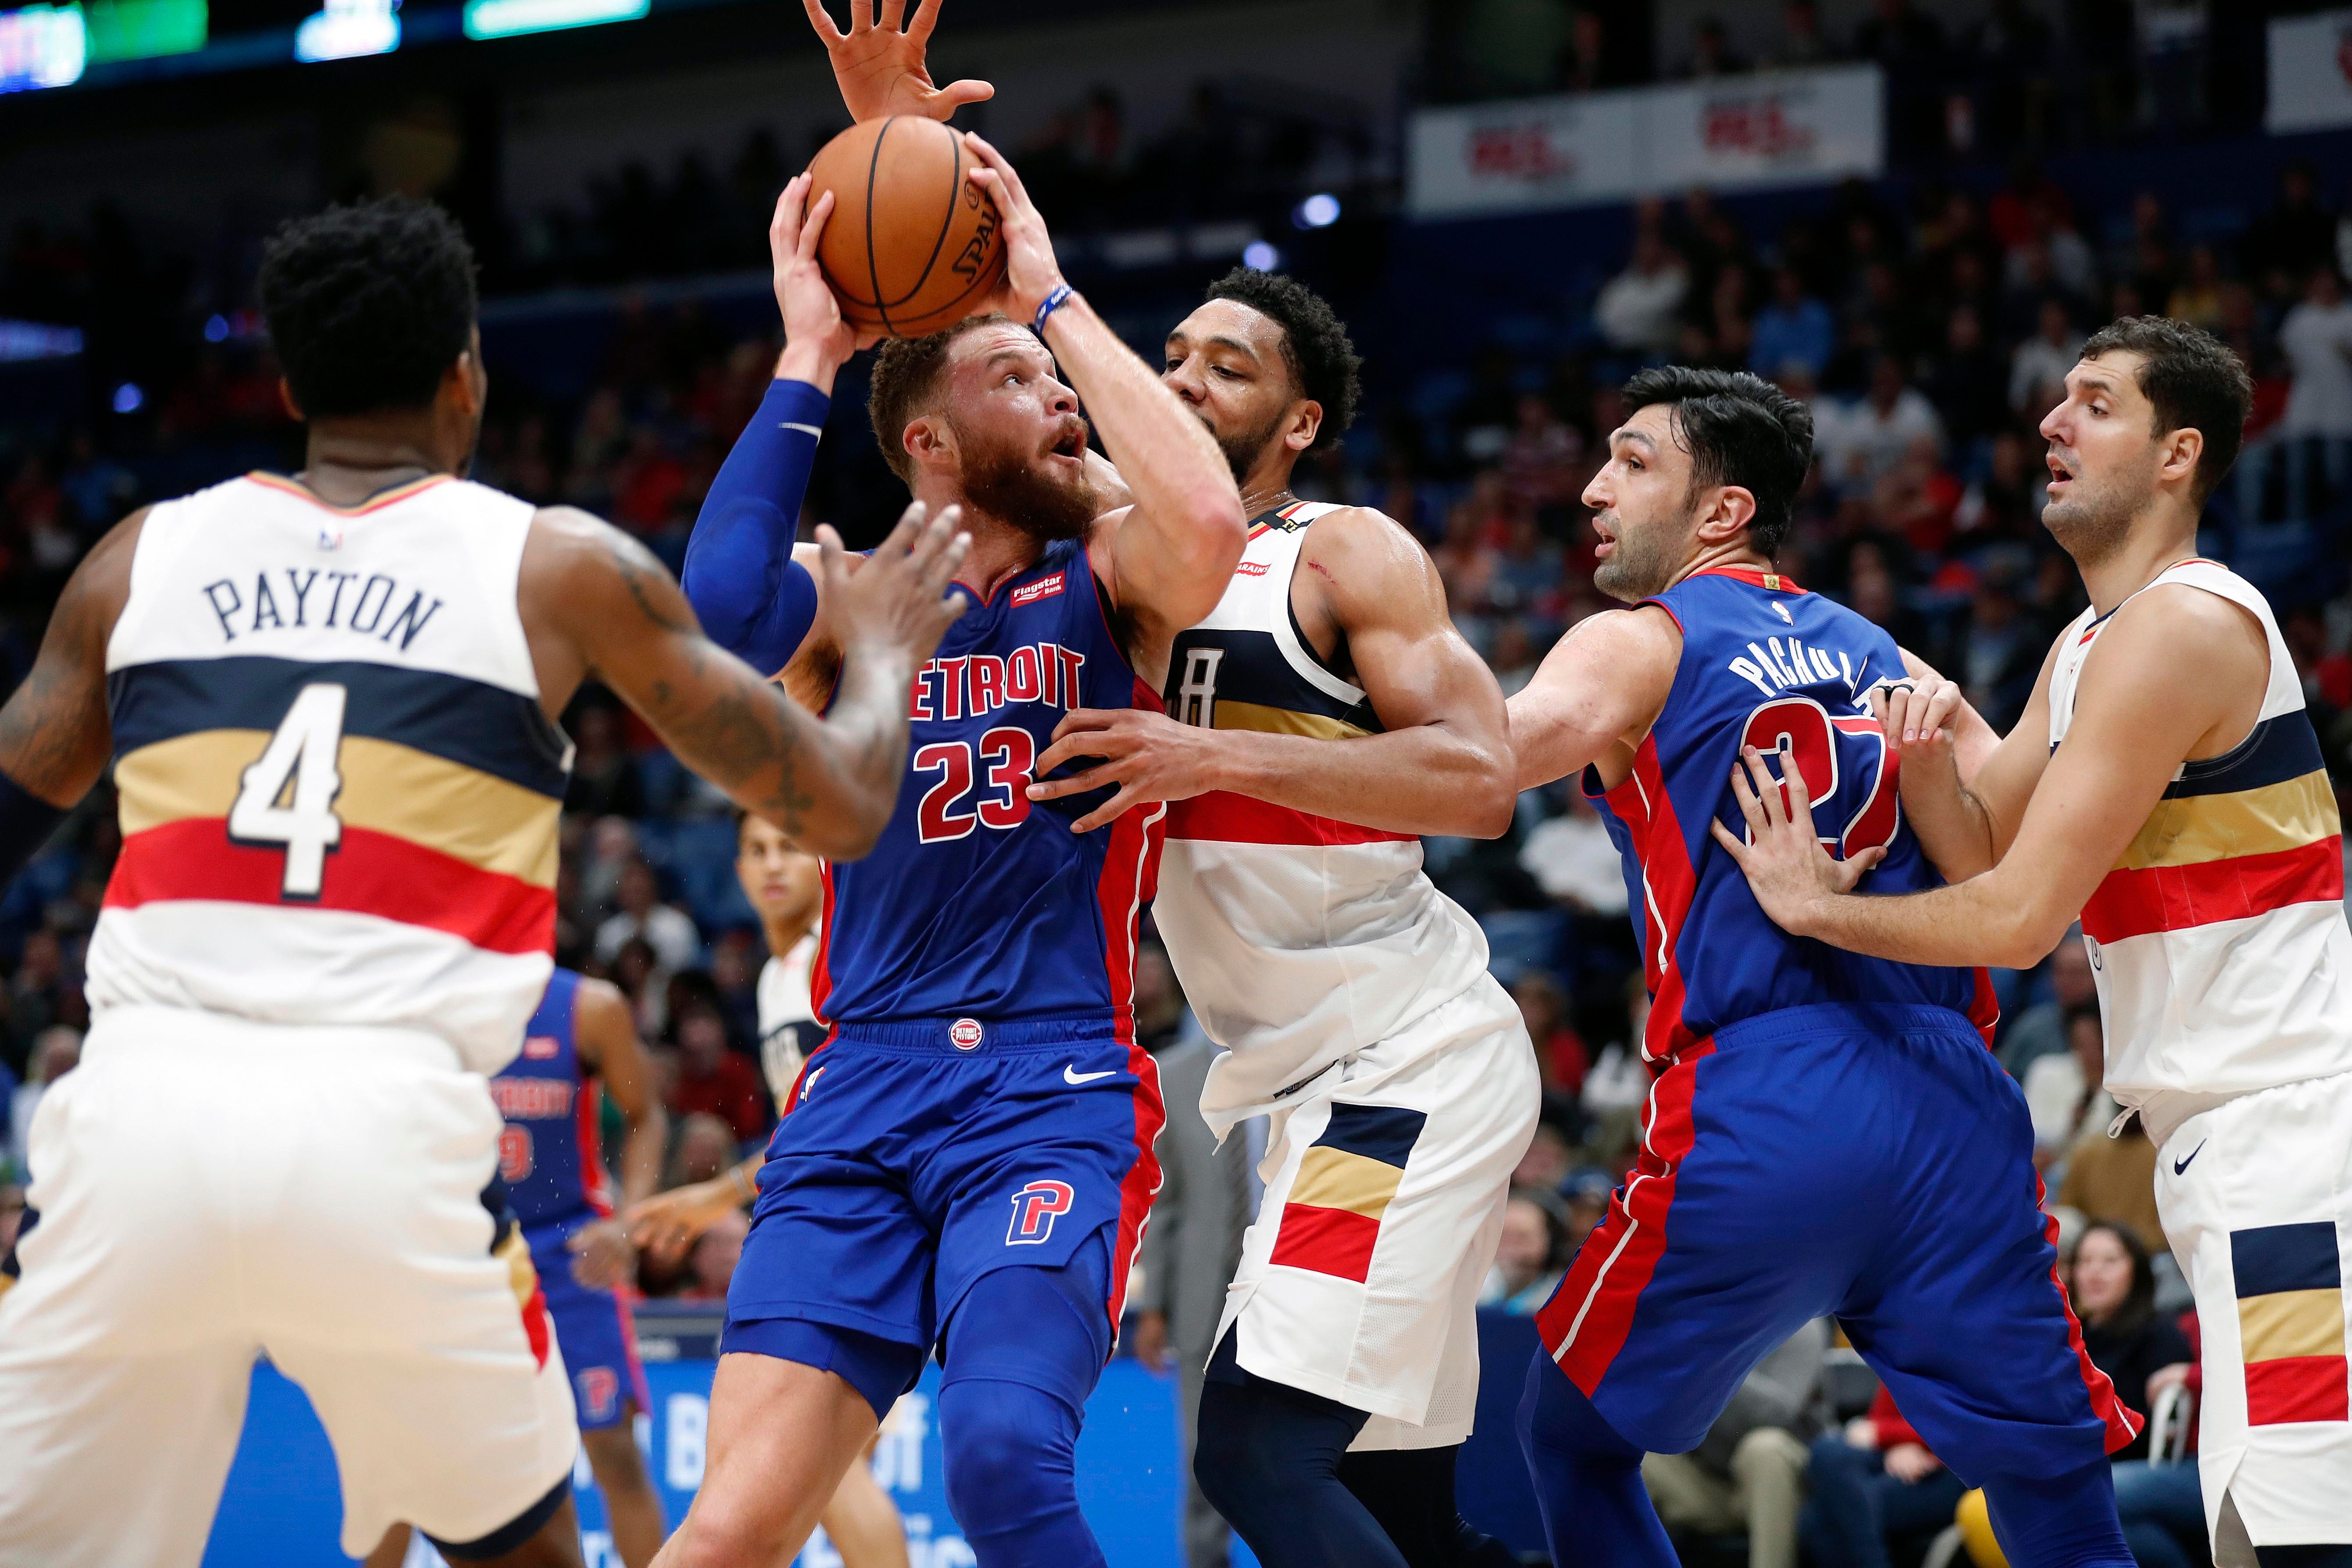 Detroit Pistons forward Blake Griffin (23) moves to the basket against New Orleans Pelicans center Jahlil Okafor in the first half.